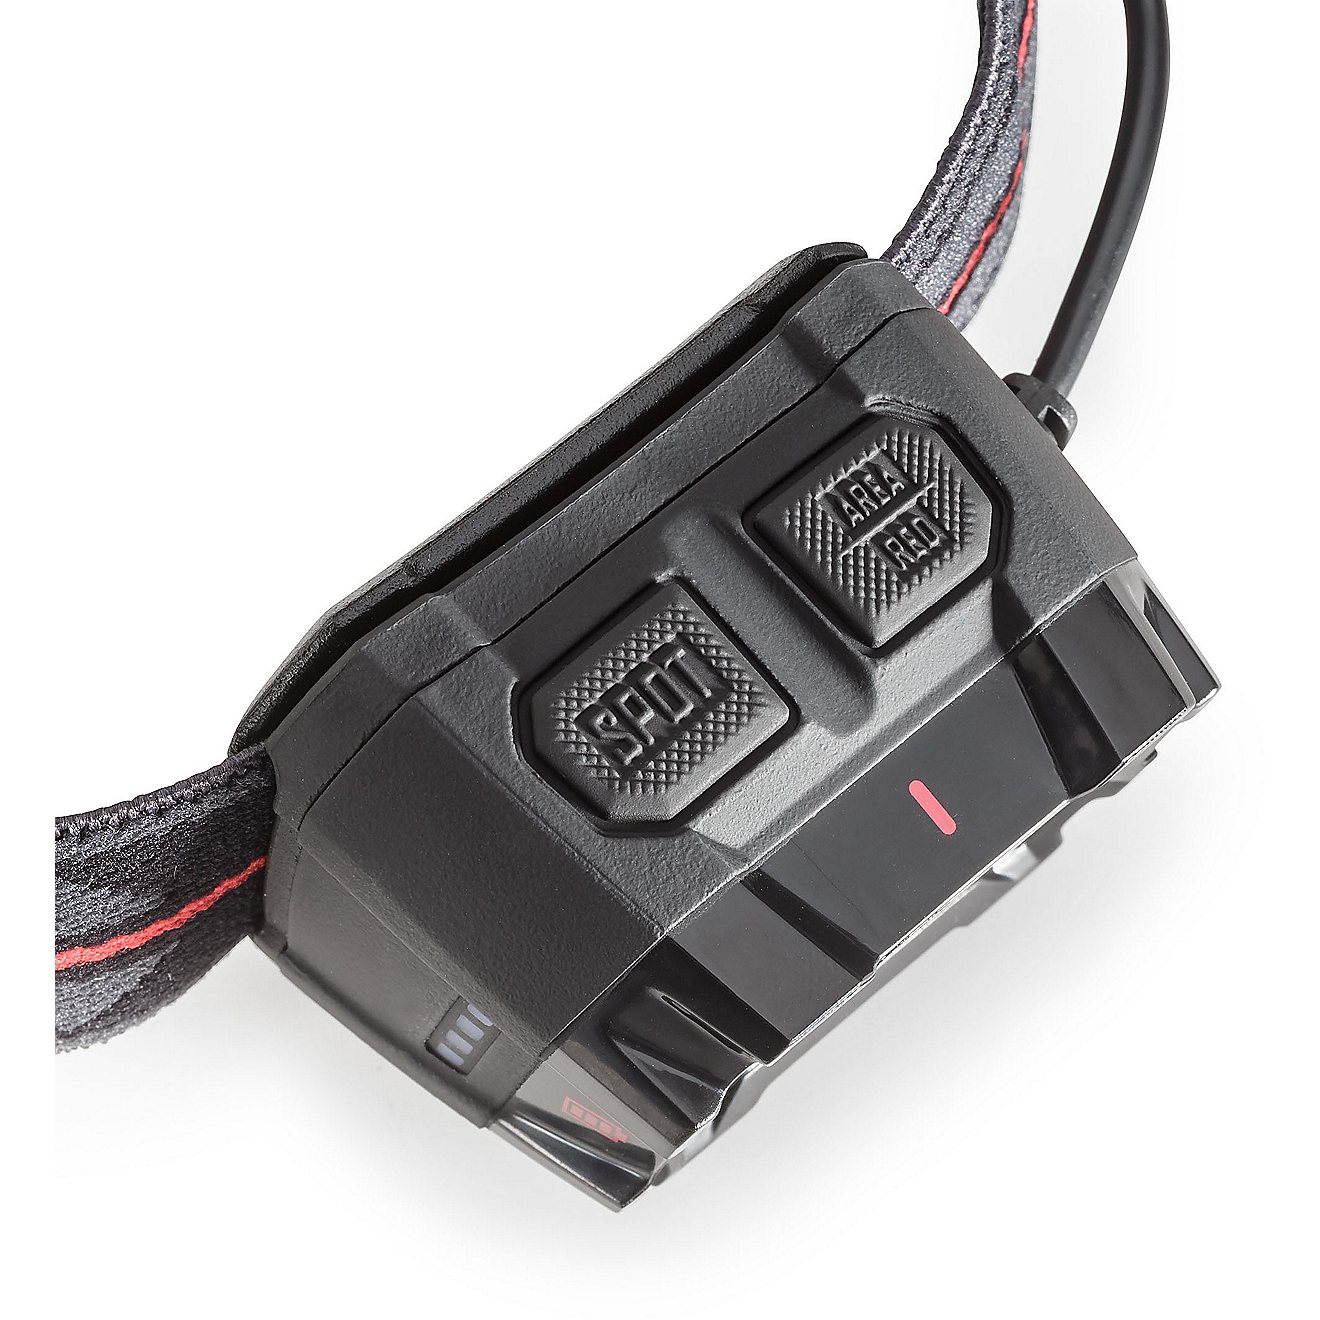 Bushnell PRO Rechargeable 400L Headlamp                                                                                          - view number 5